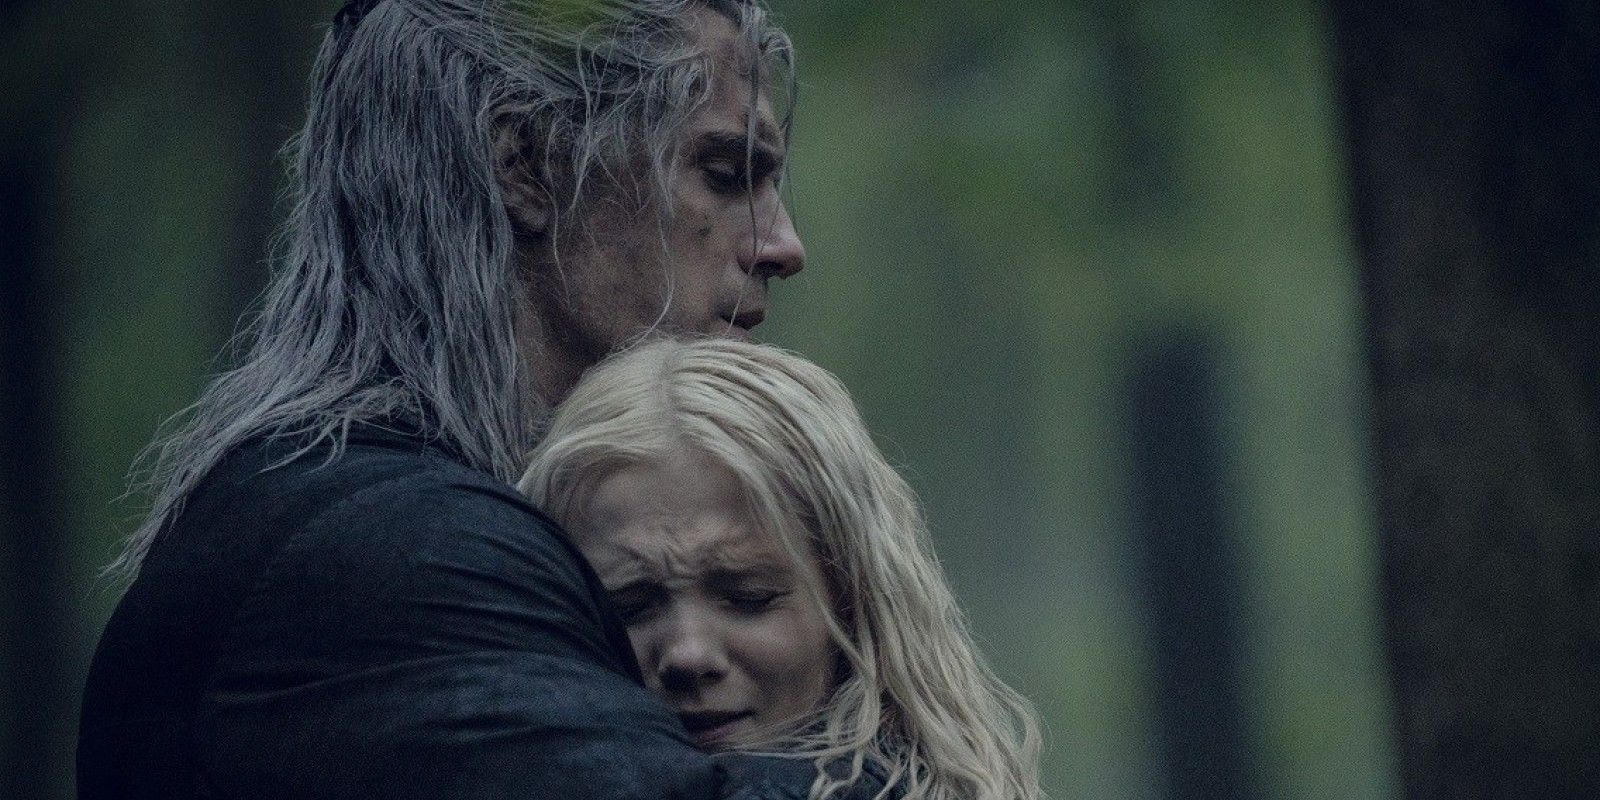 Geralt and Ciri Hugging at Kaer Morhen in The Witcher Season 2